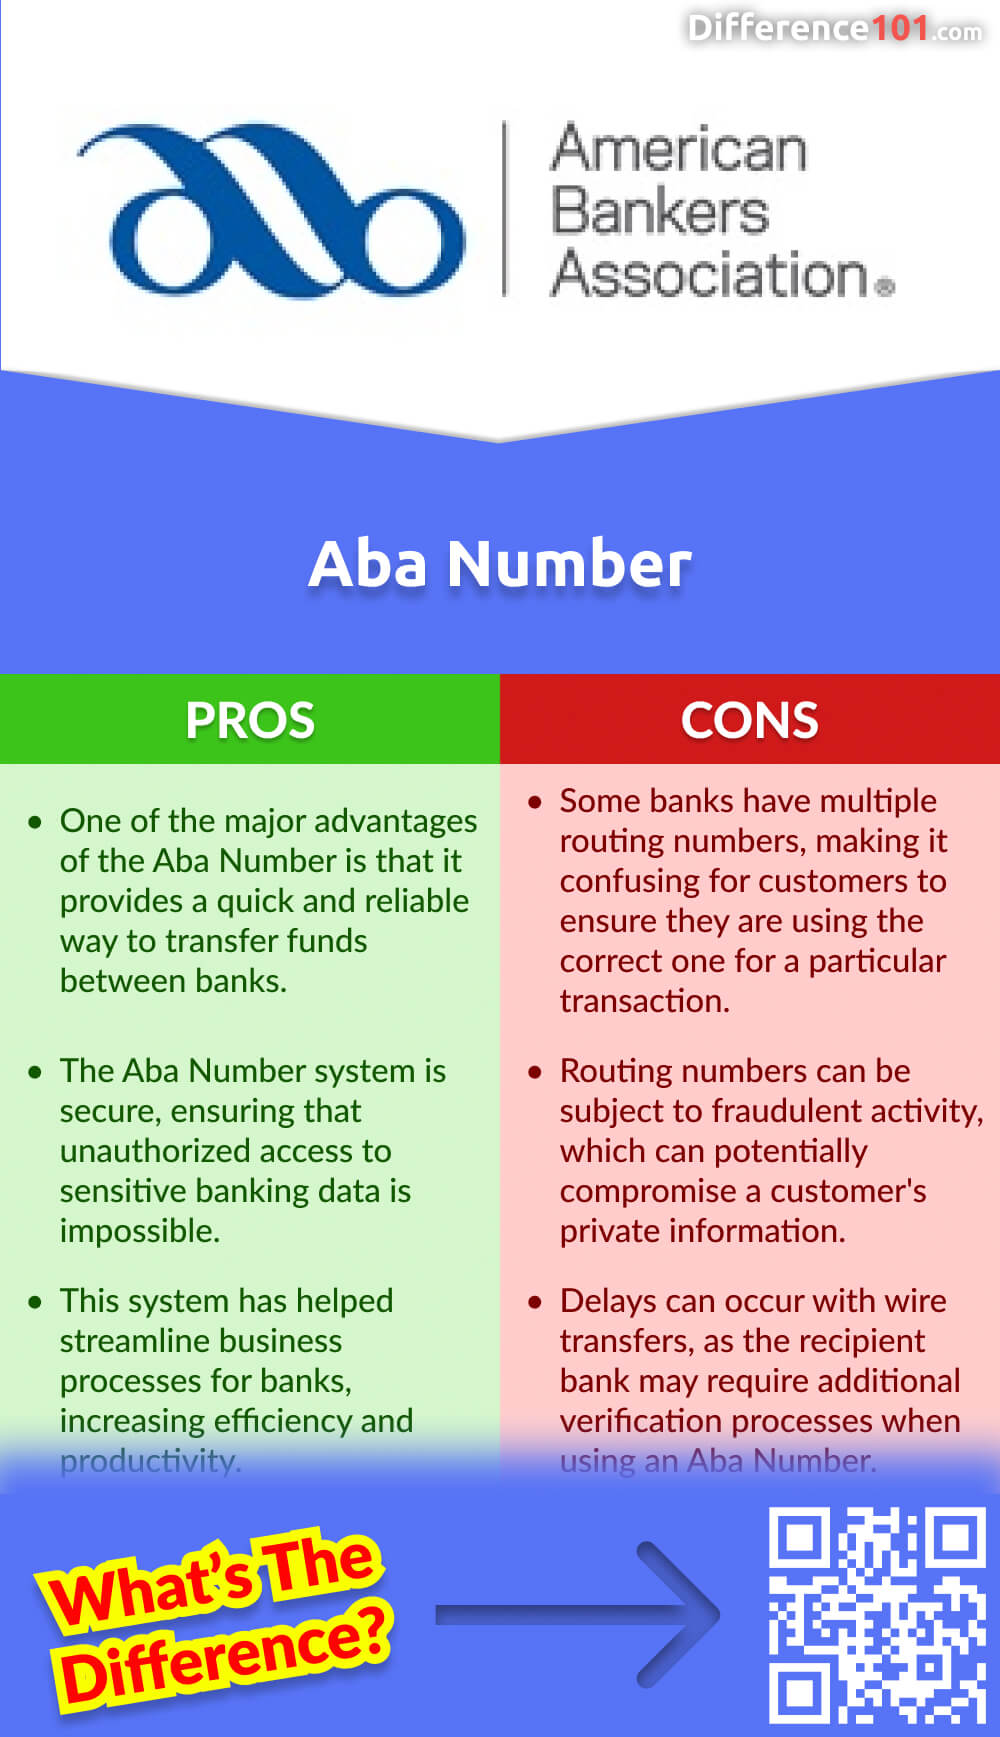 Aba Number Pros & Cons